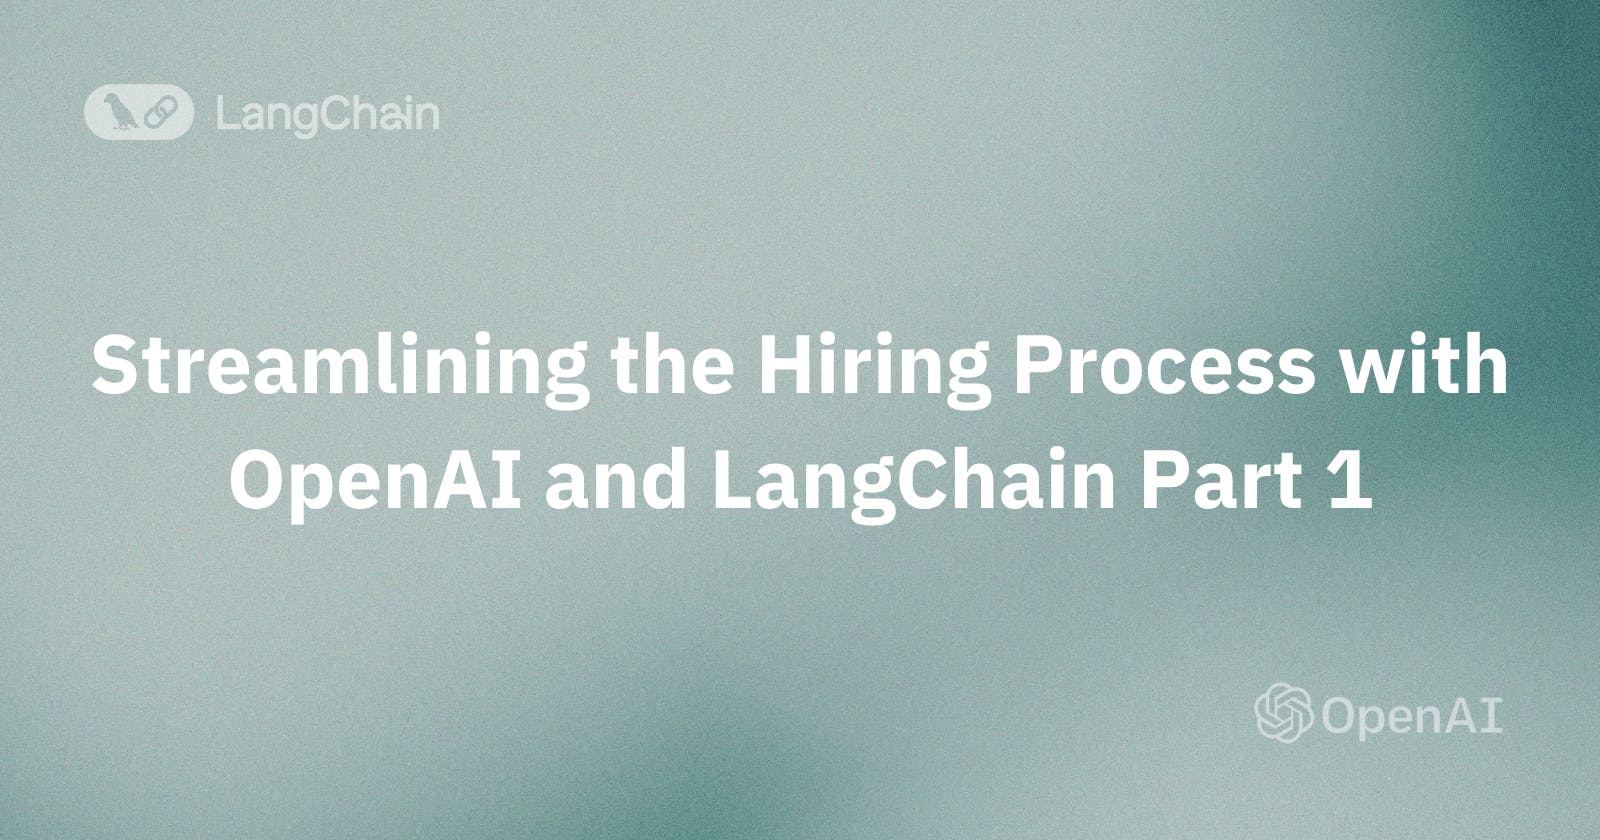 Streamlining the Hiring Process with OpenAI and LangChain Part 1